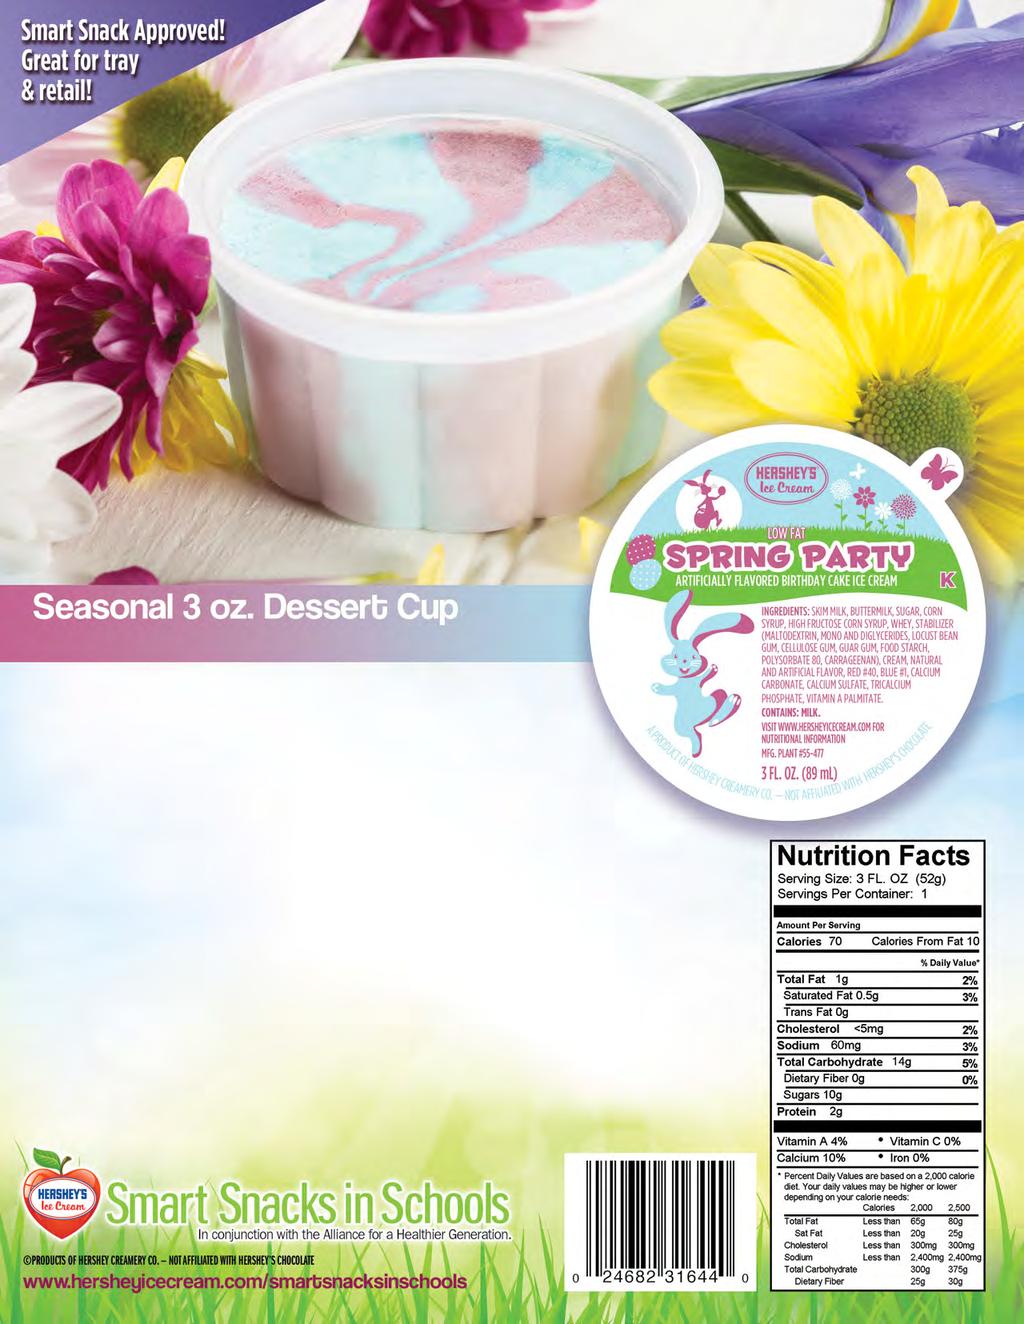 PRE-ORDER TODAY! Available April 1 - May 15. Limited Time Only! There is no better way to celebrate Springtime than with a party and lots of sweet tasting goodies.